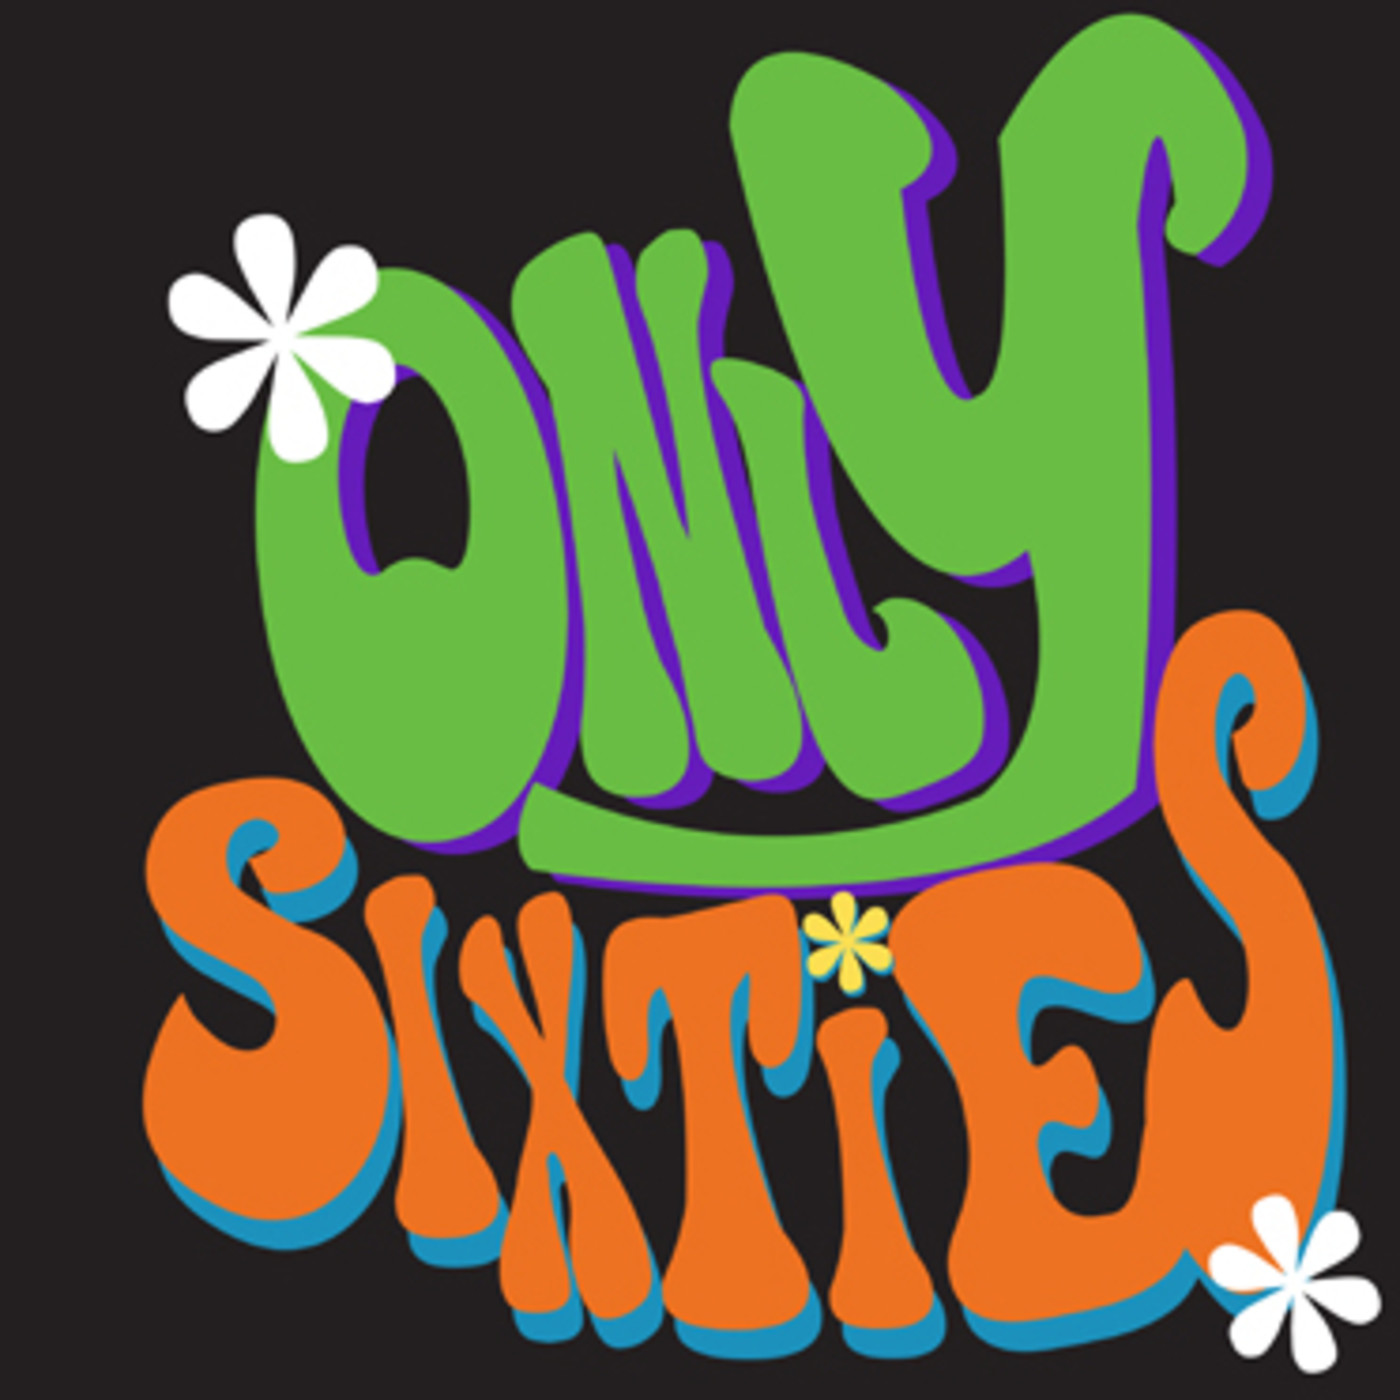 Only Sixties (Bye Johnny)